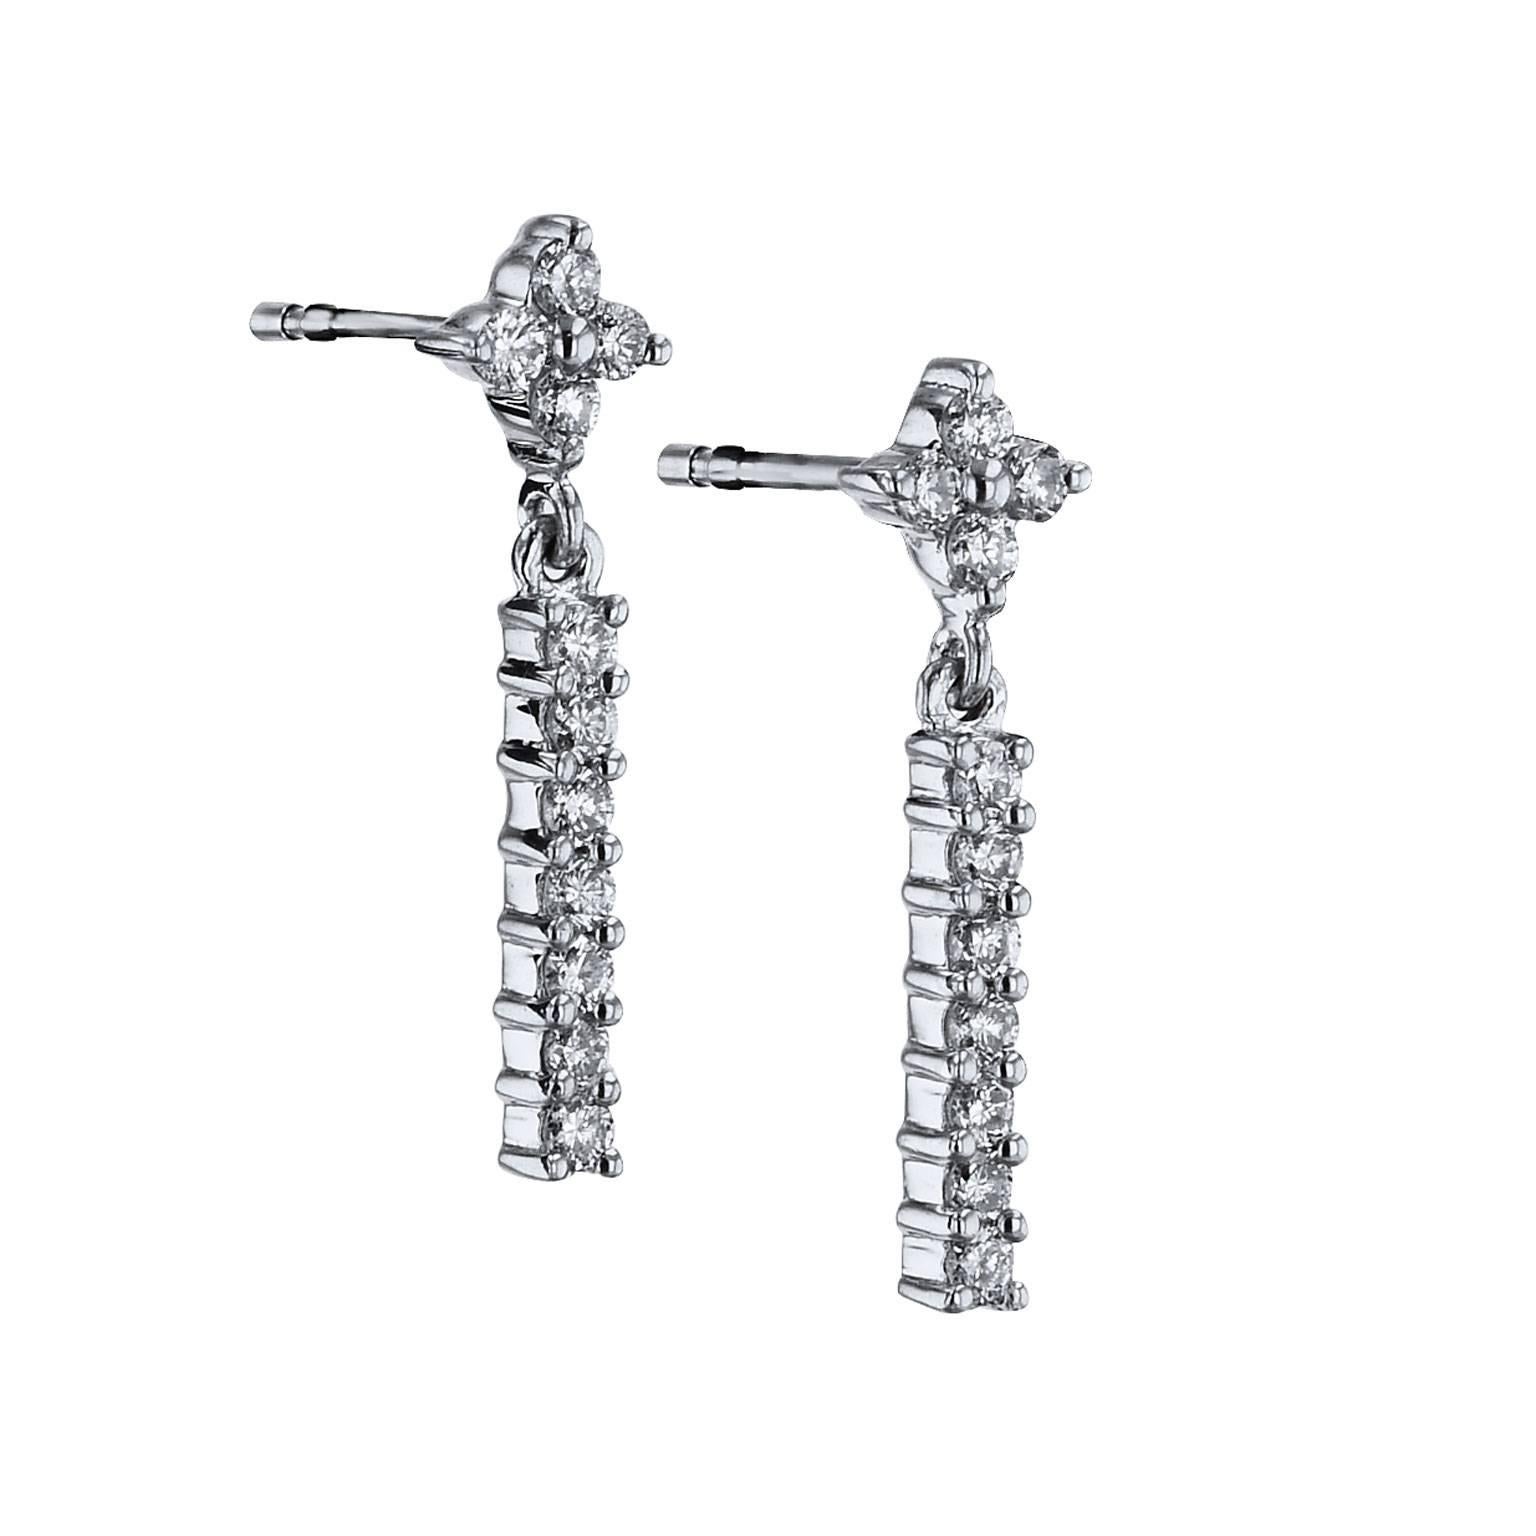 Gabriel and Co. 0.40 Carat Diamond Dangle Earrings in 14 karat White Gold

Drip with white gold and diamonds in these previously loved Gabriel and Co. dangle earrings. 0.40 carat of prong and shared-prong diamonds (G/H/SI) illuminate in 14 karat